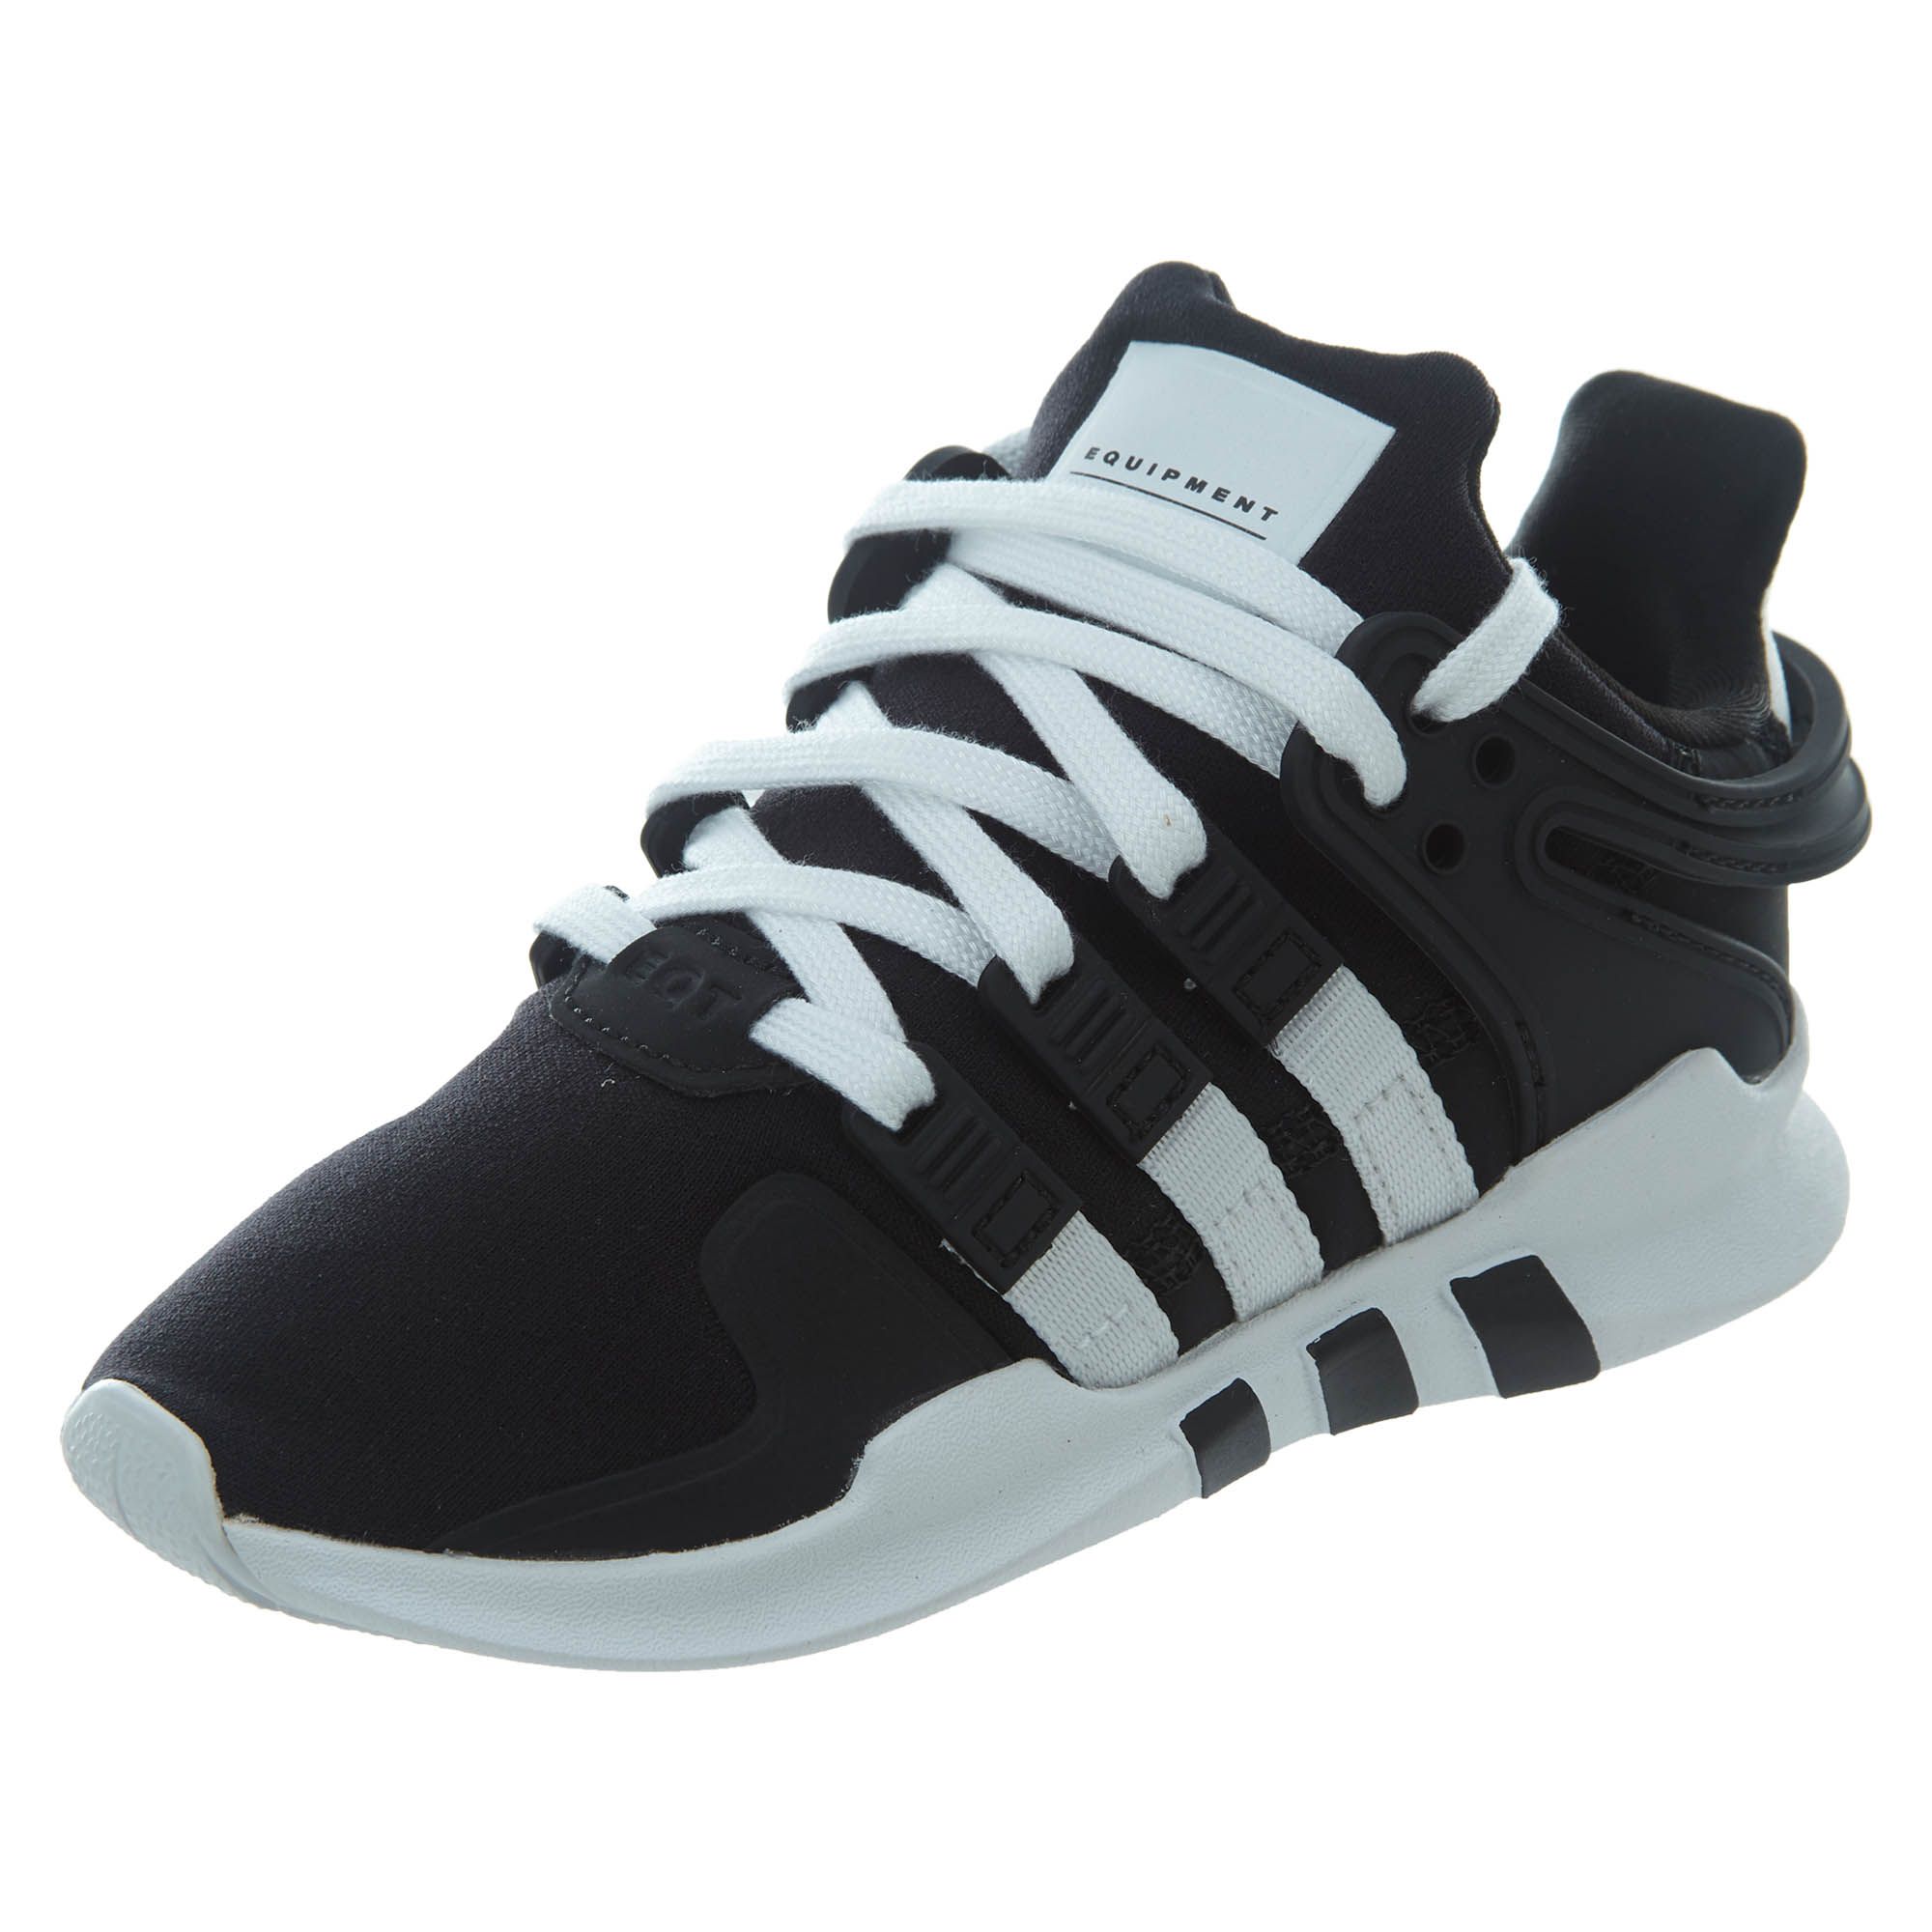 adidas eqt support adv toddler